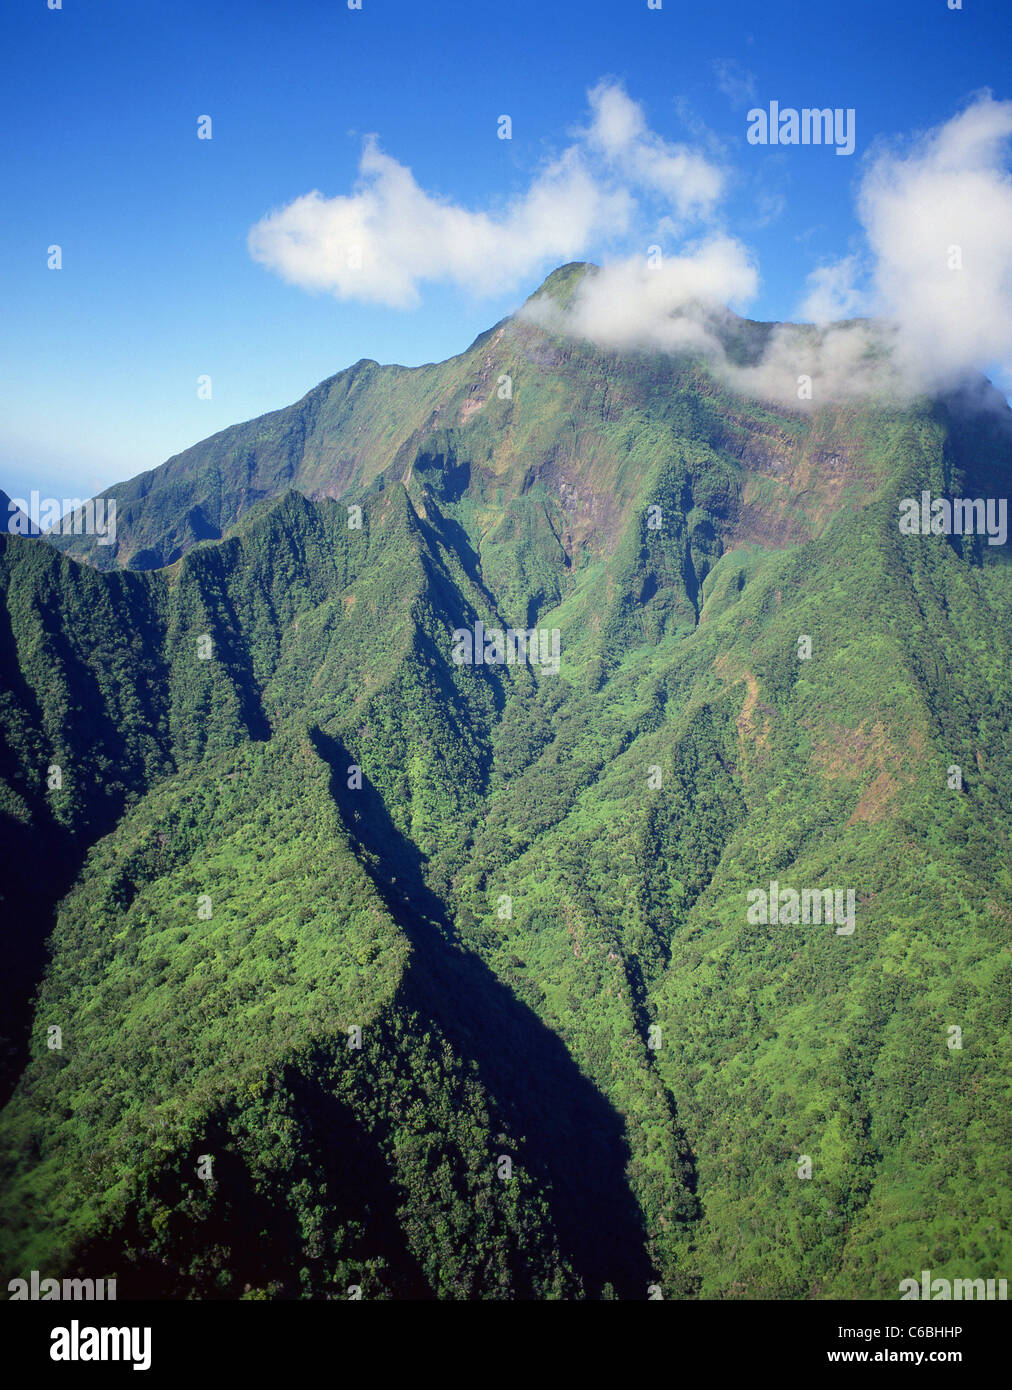 Aerial view of West Maui Mountains, Maui, Hawaii, United States of America Stock Photo